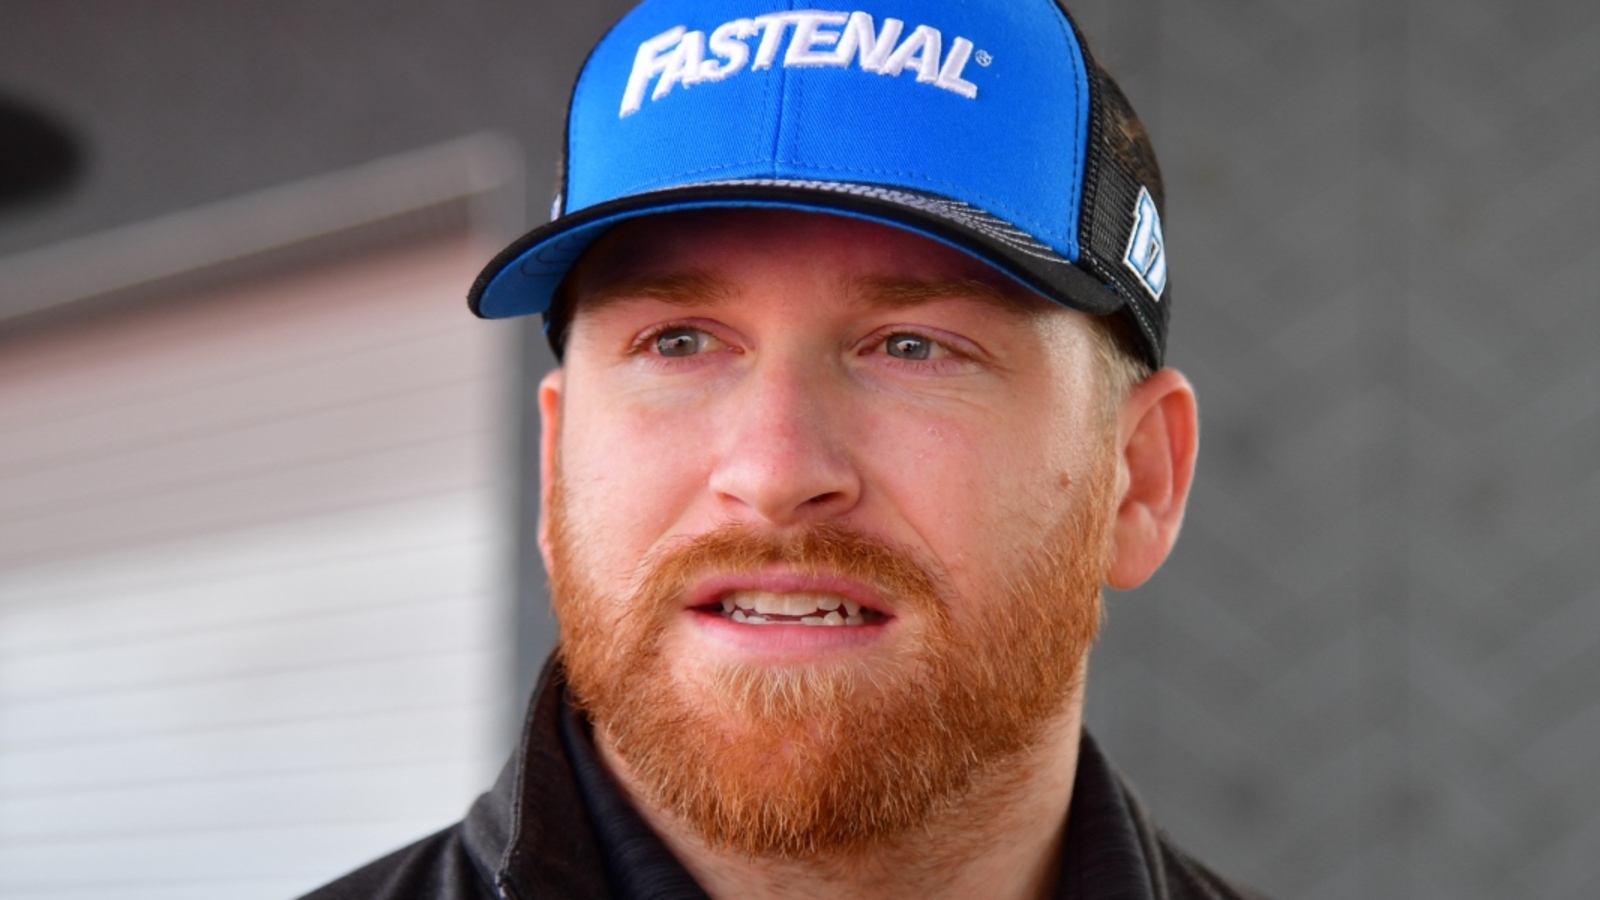 Chris Buescher crew chief meets with NASCAR officials after photo finish with Kyle Larson, accepts race outcome